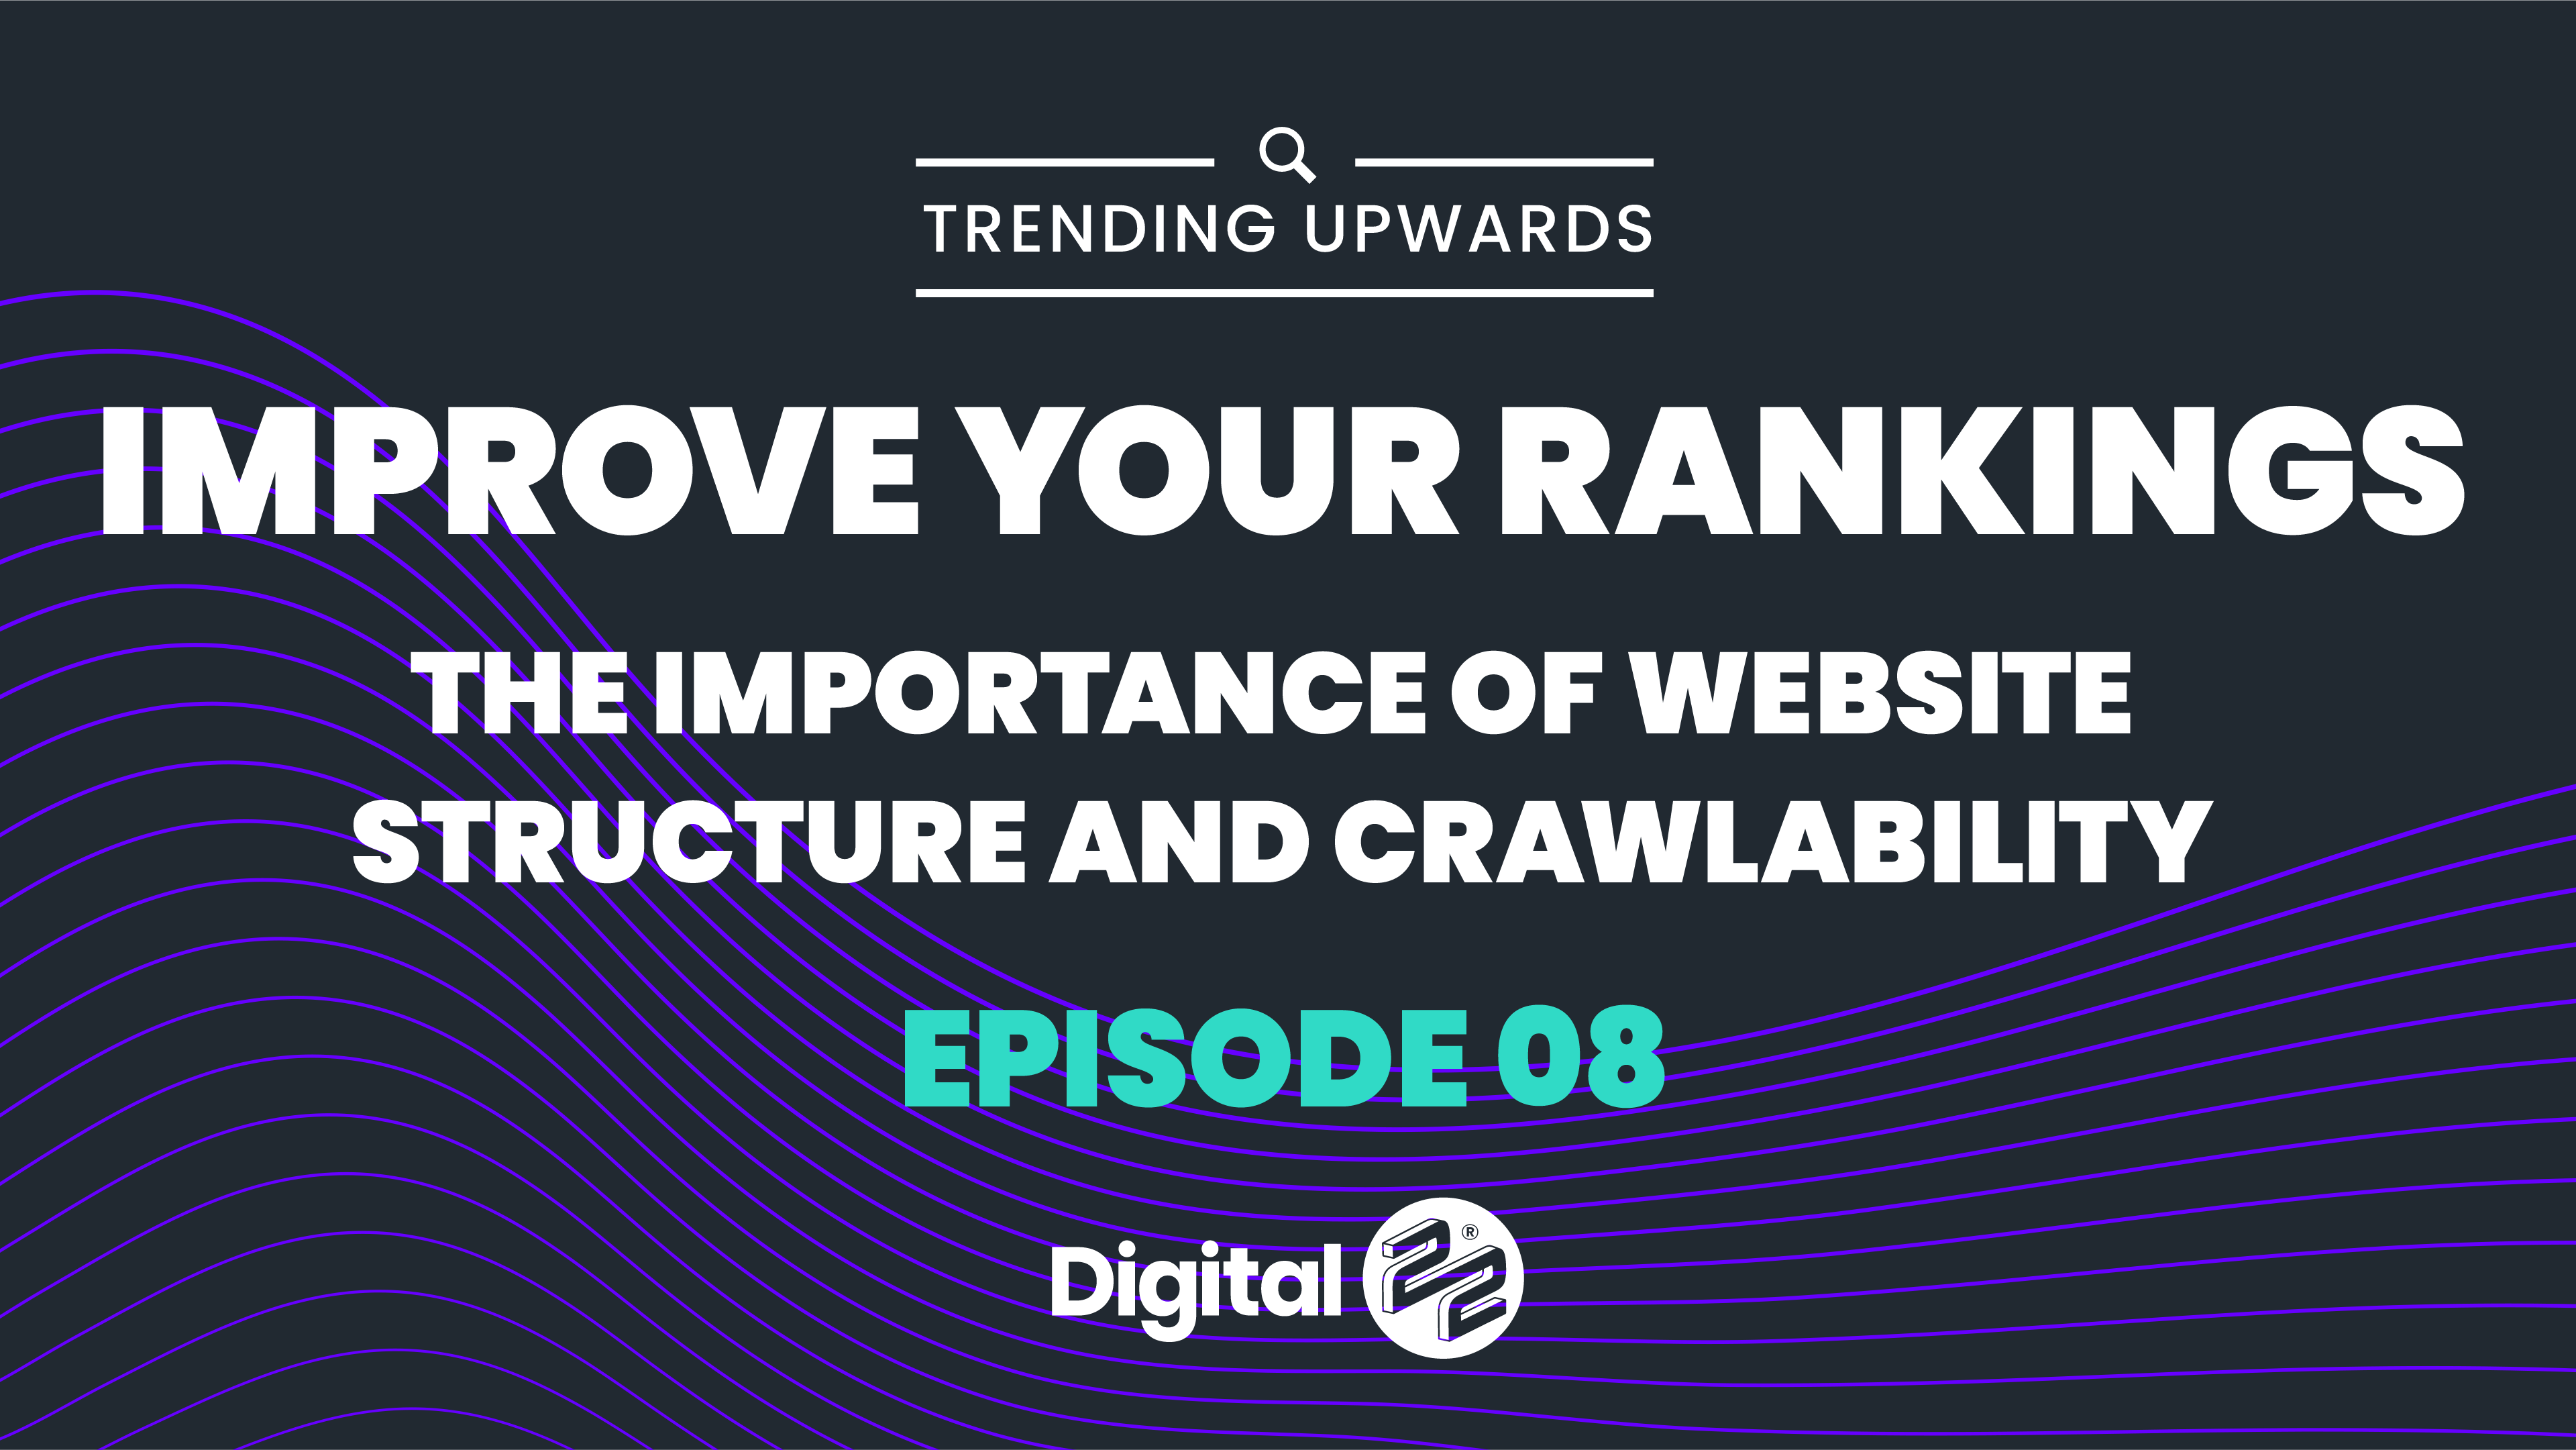 TRENDING UPWARDS: The importance of website structure and crawlability in improving your rankings